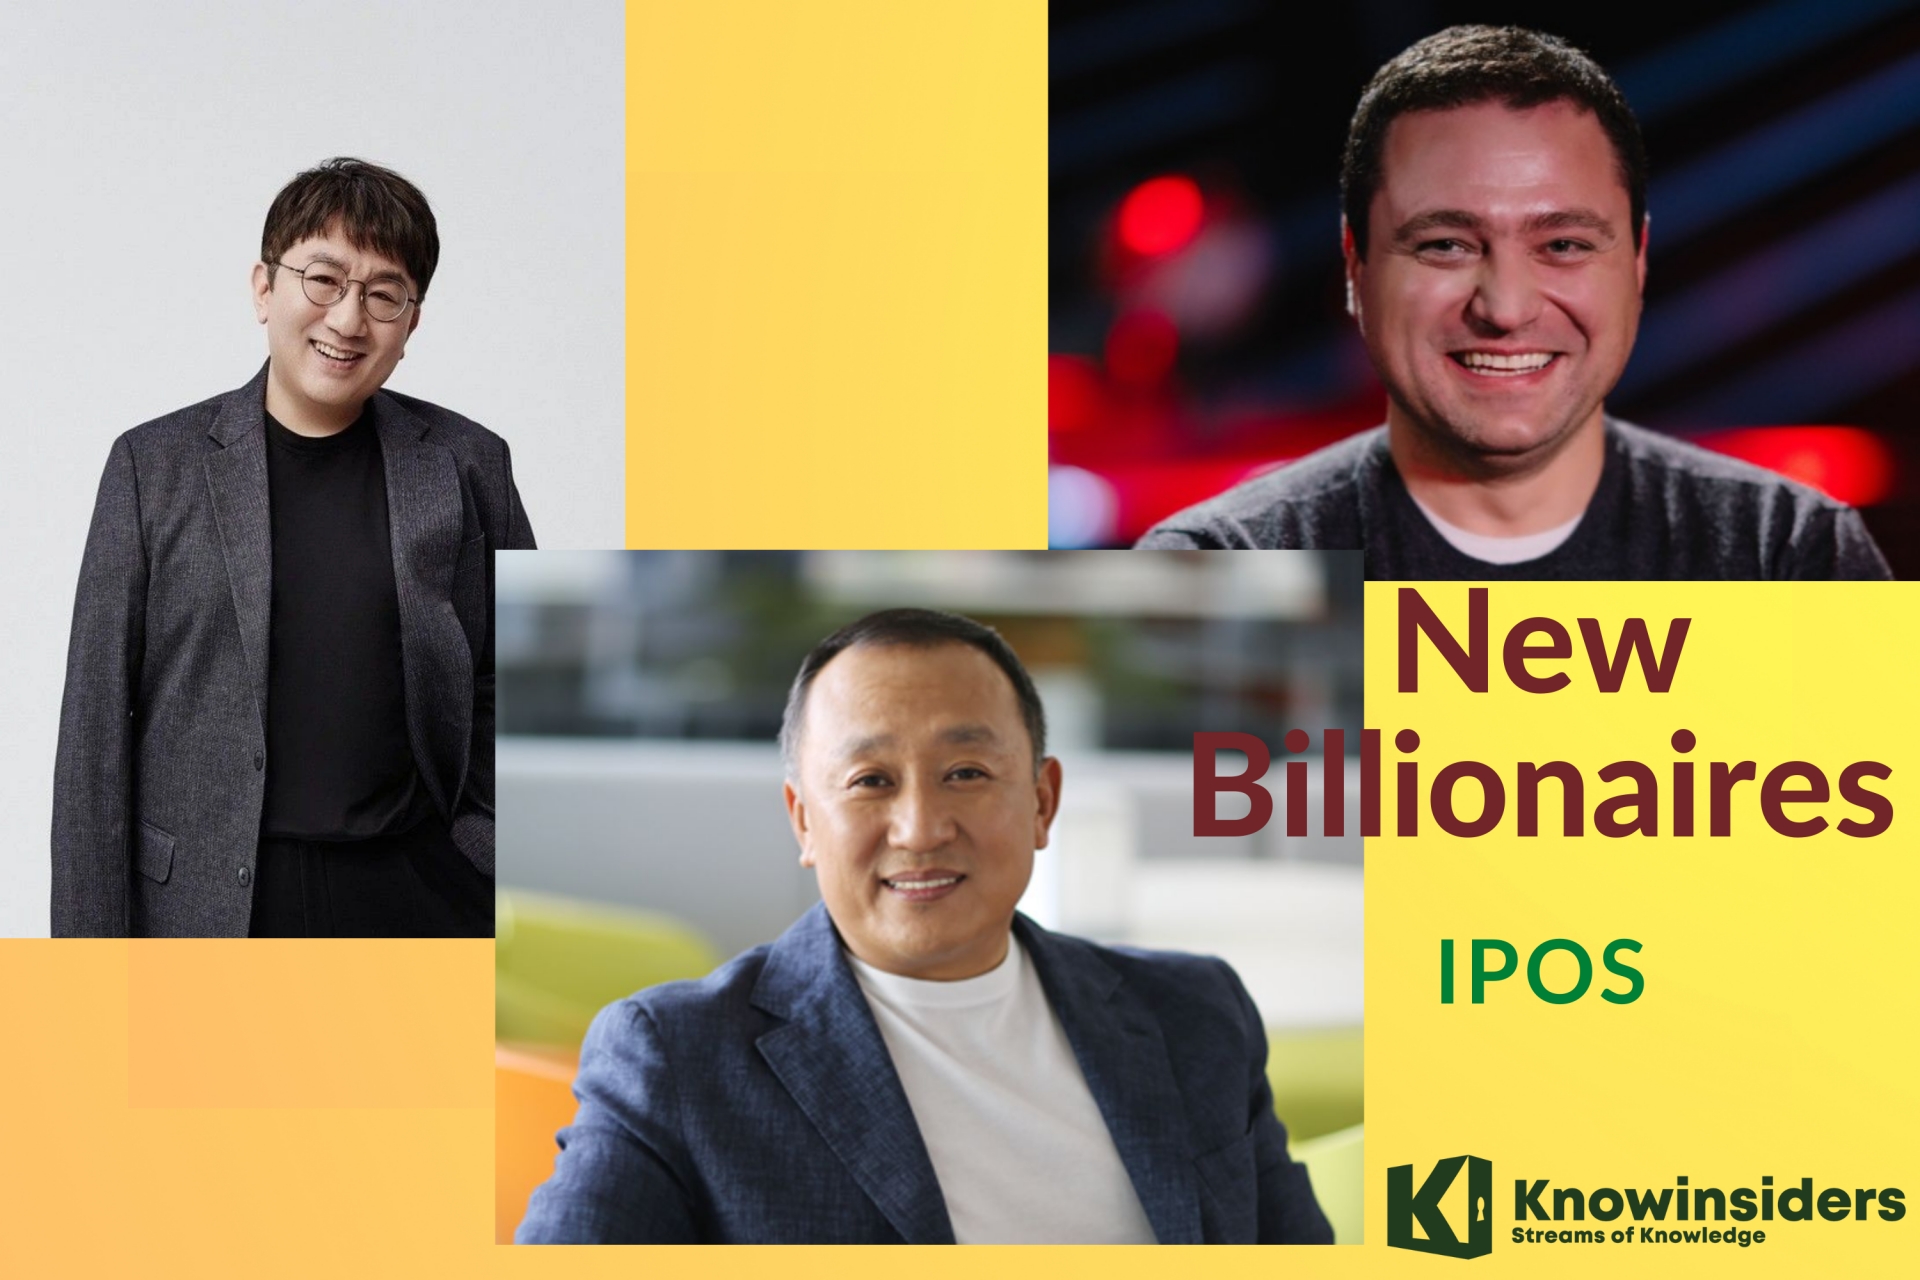 Top 11 New Billionaires from IPOs in 2021